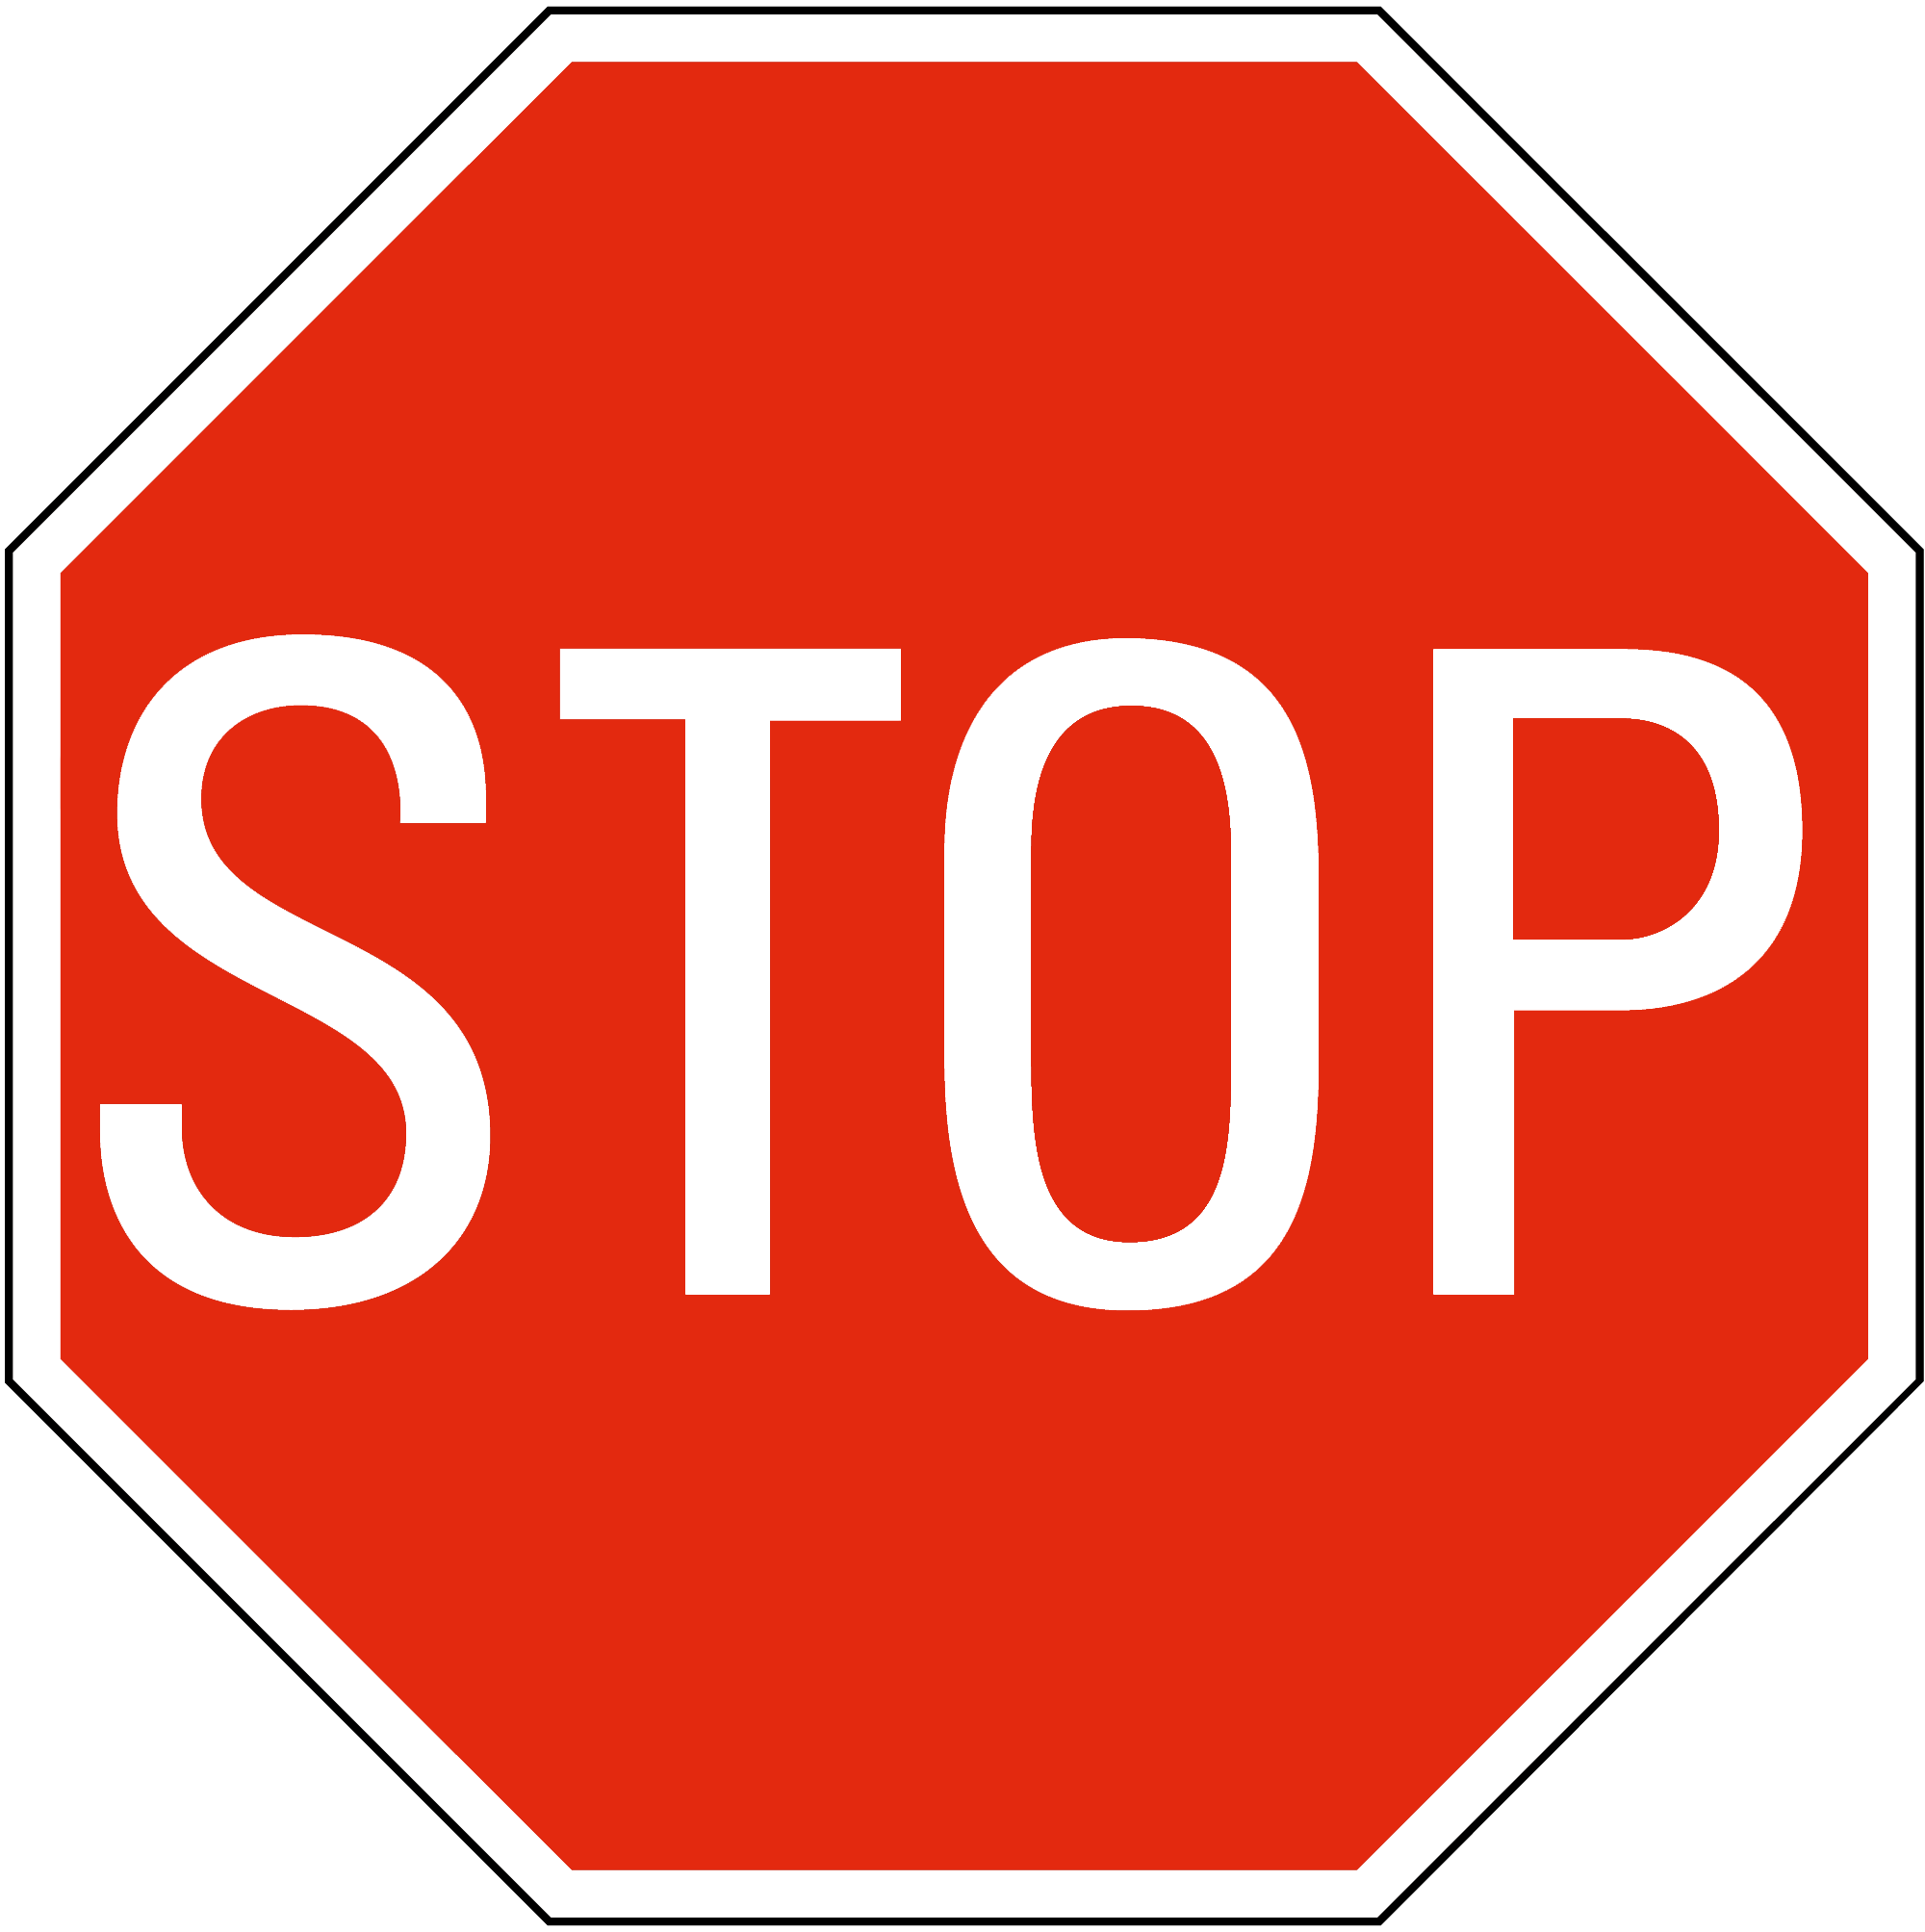 Printable Stop Signs - ClipArt Best